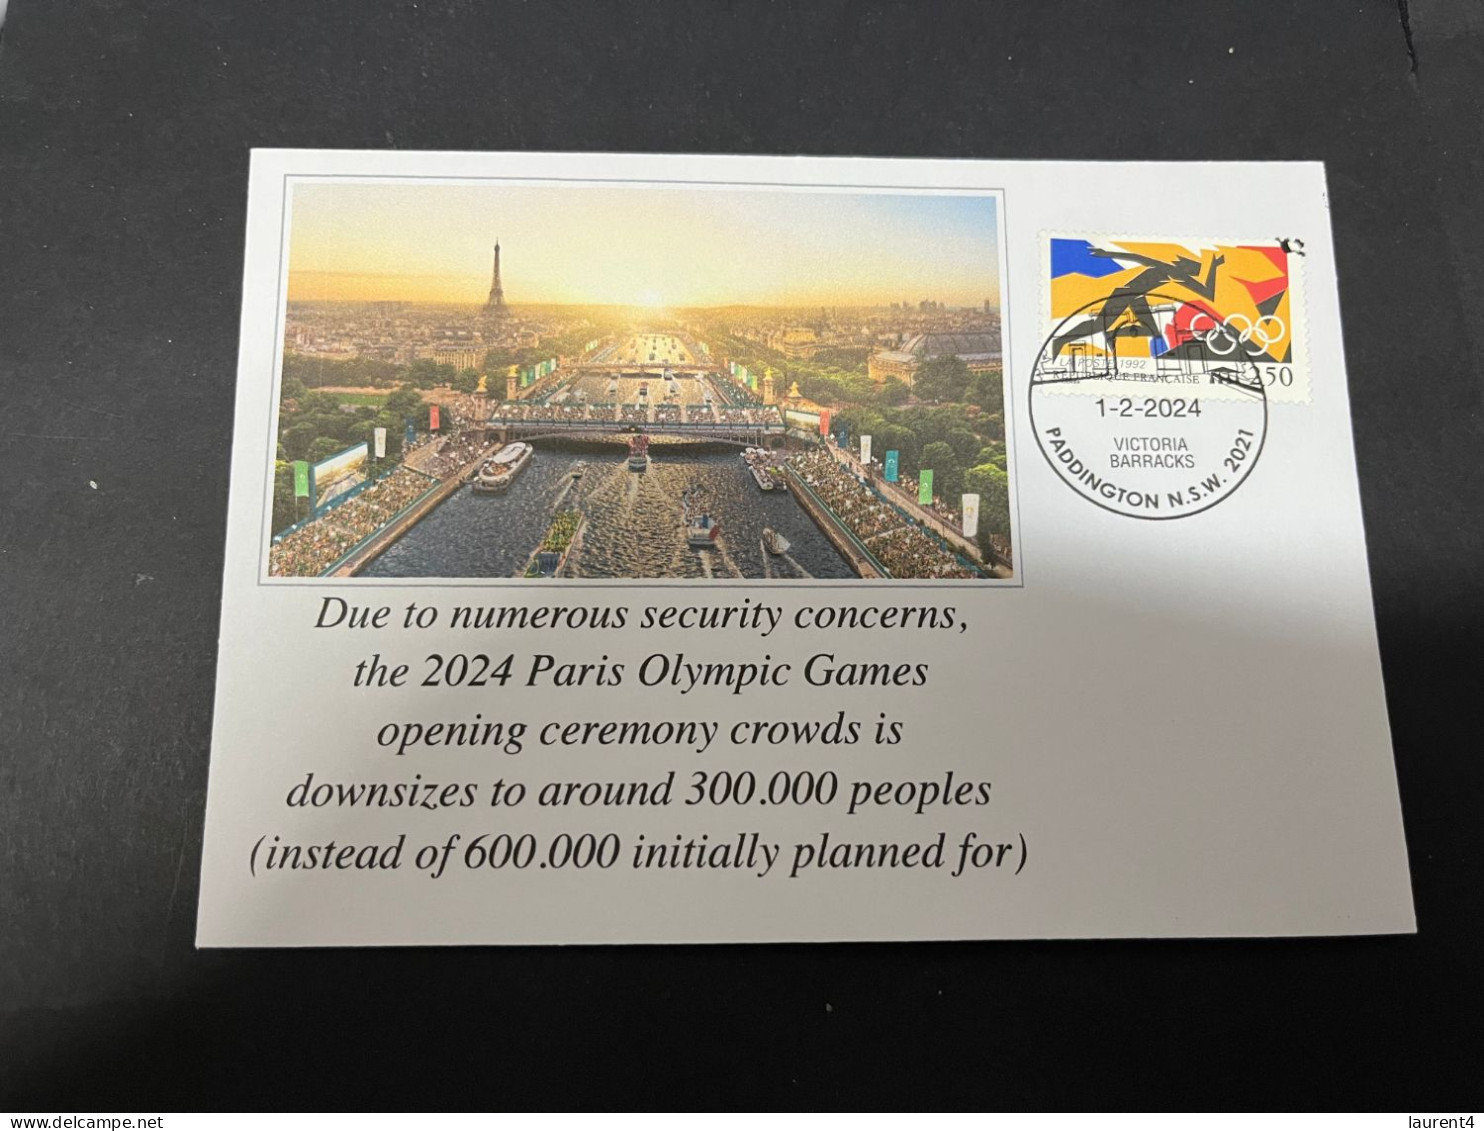 2-2-2024 (3 X 7) Paris Olympic Games 2024 - Opening Ceremony Capped To 300.000 Spectators For Securty Reasons - Eté 2024 : Paris